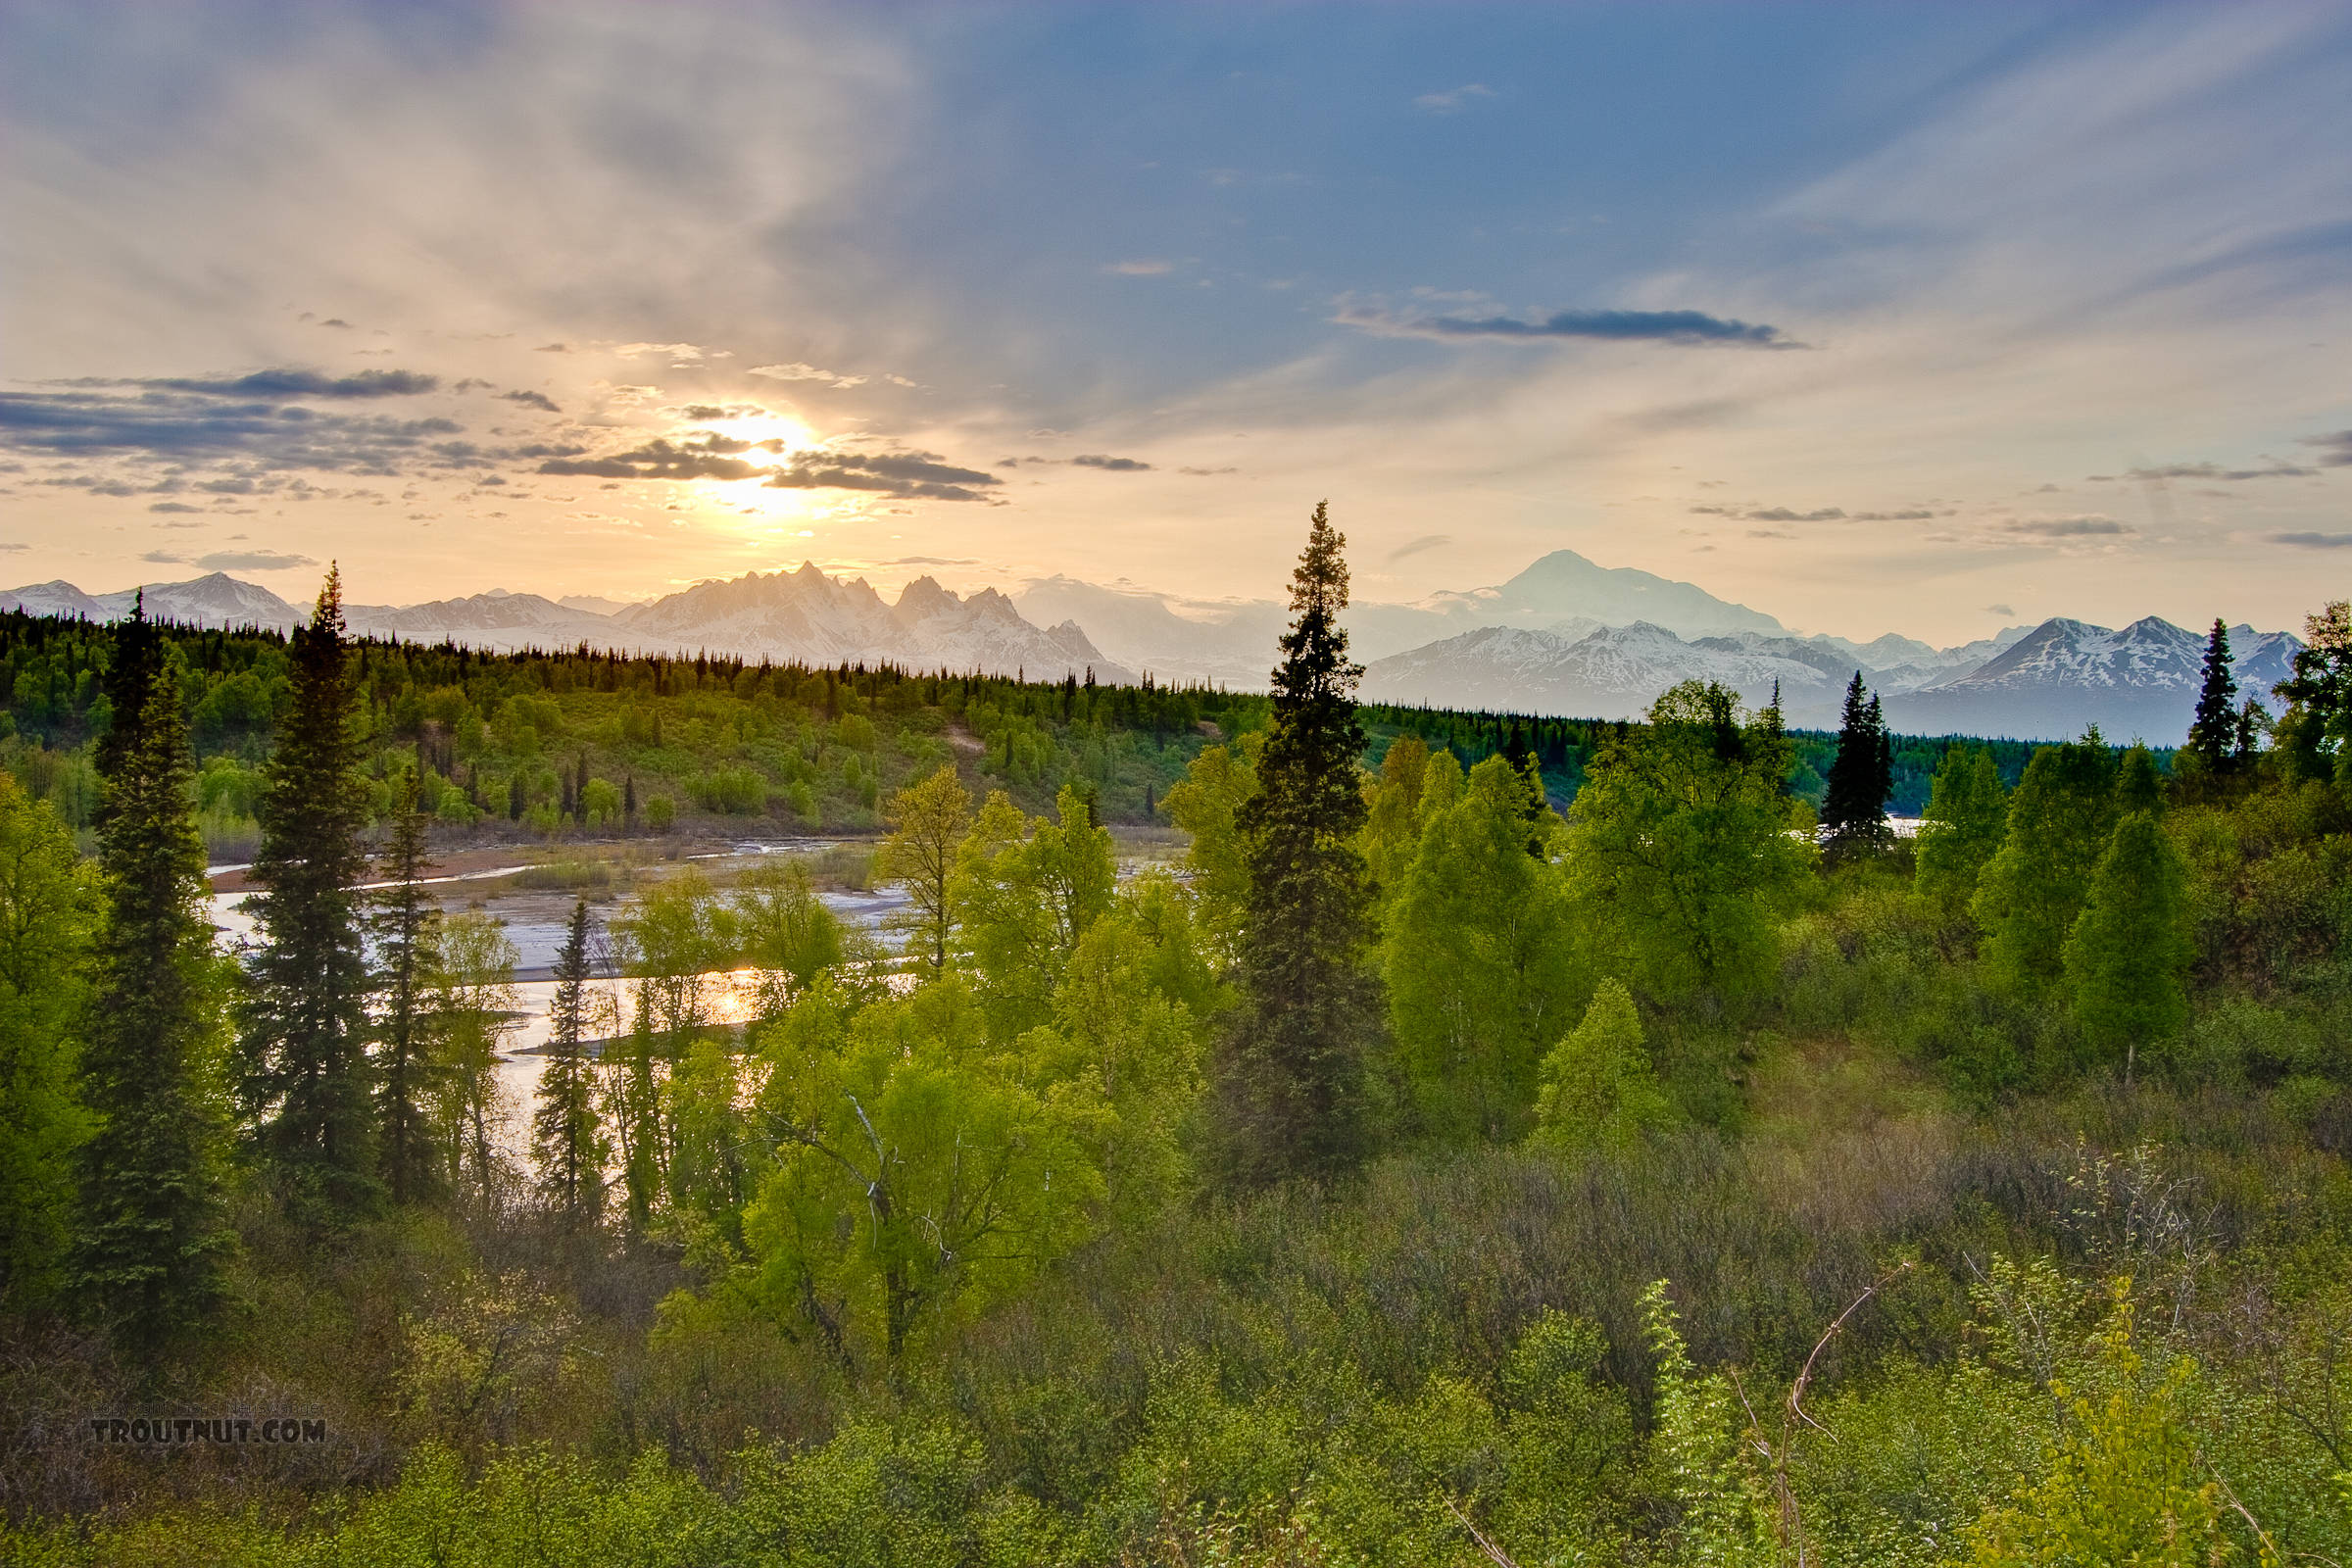 I took this picture on my way home from Homer, from one of the Denali overlooks on the Parks Highway a ways north of Talkeetna.  That is an amazing drive at all times of year, and spring is no exception.  The highest, most distant mountain visible is Denali / Mount McKinley, while the rest of the Alaska Range rises over the Chulitna River in the foreground. From Parks Highway in Alaska.